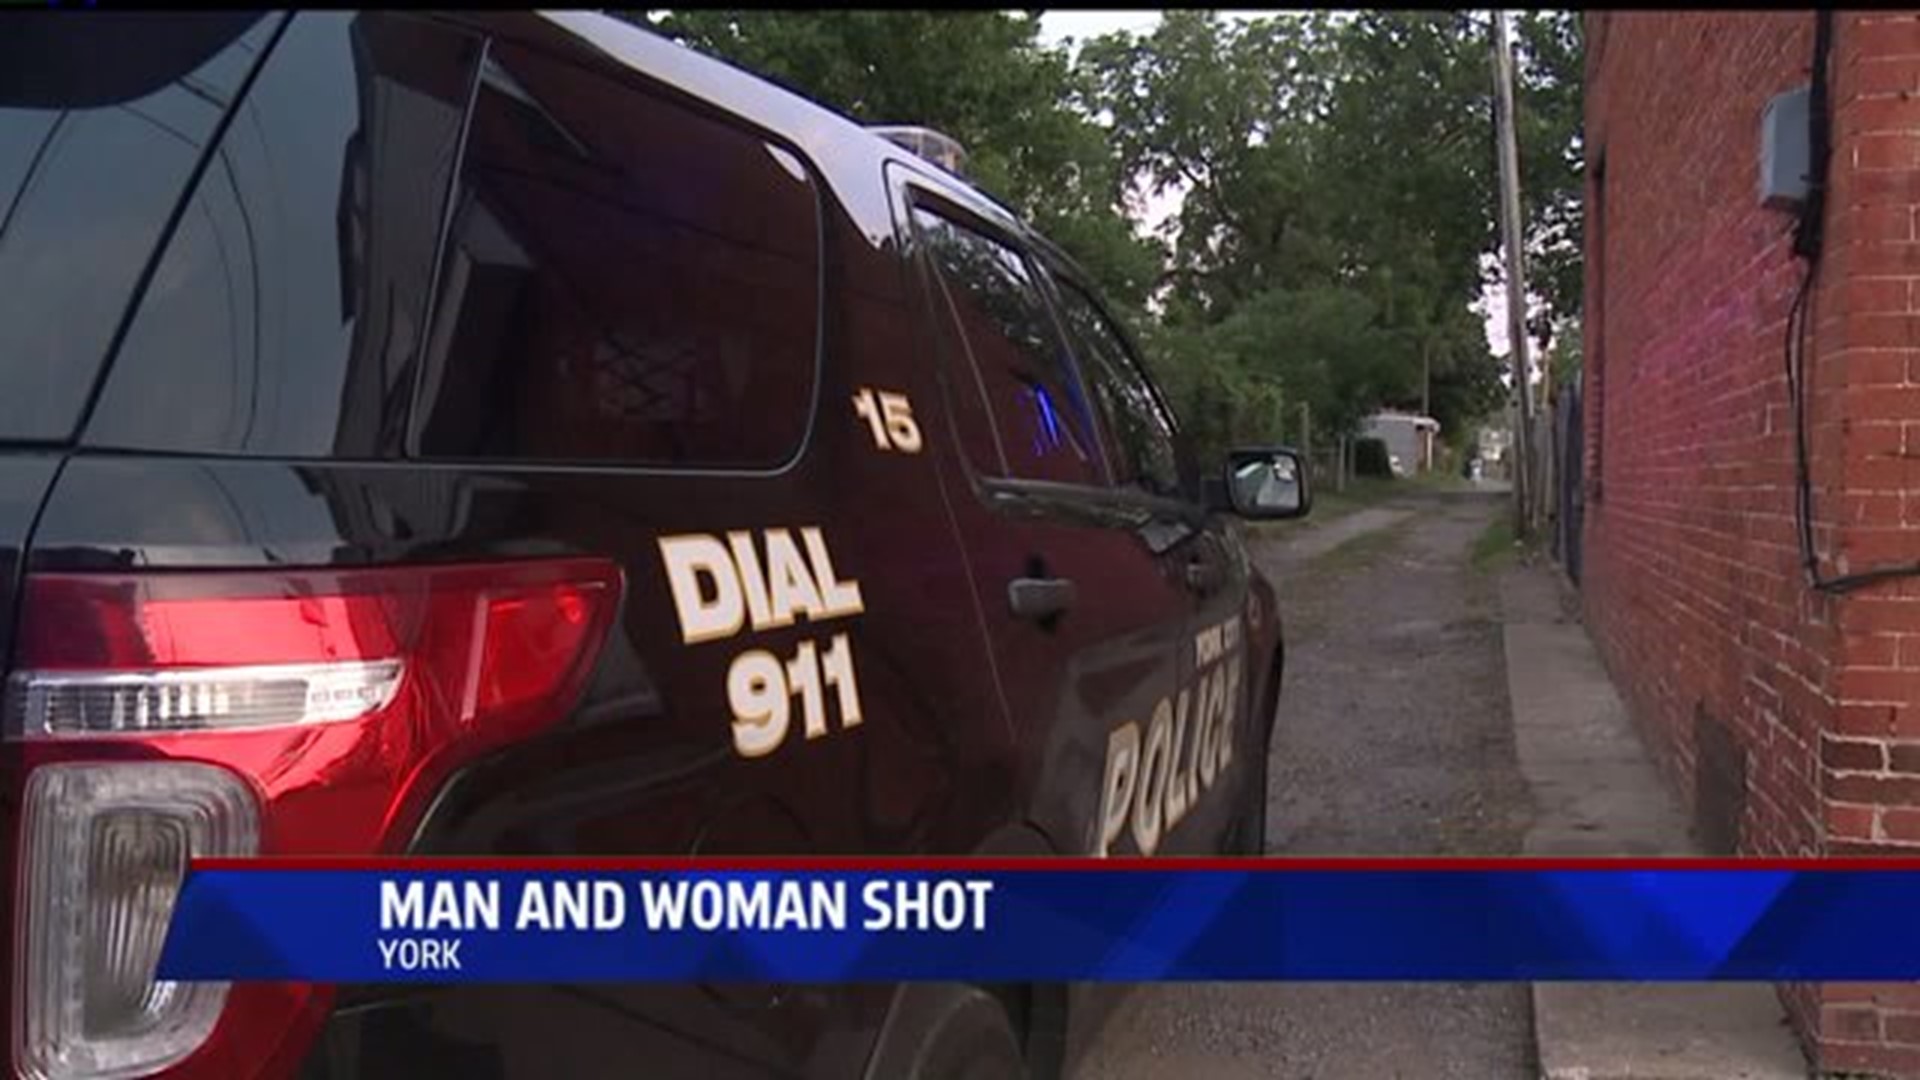 Man and woman shot in York